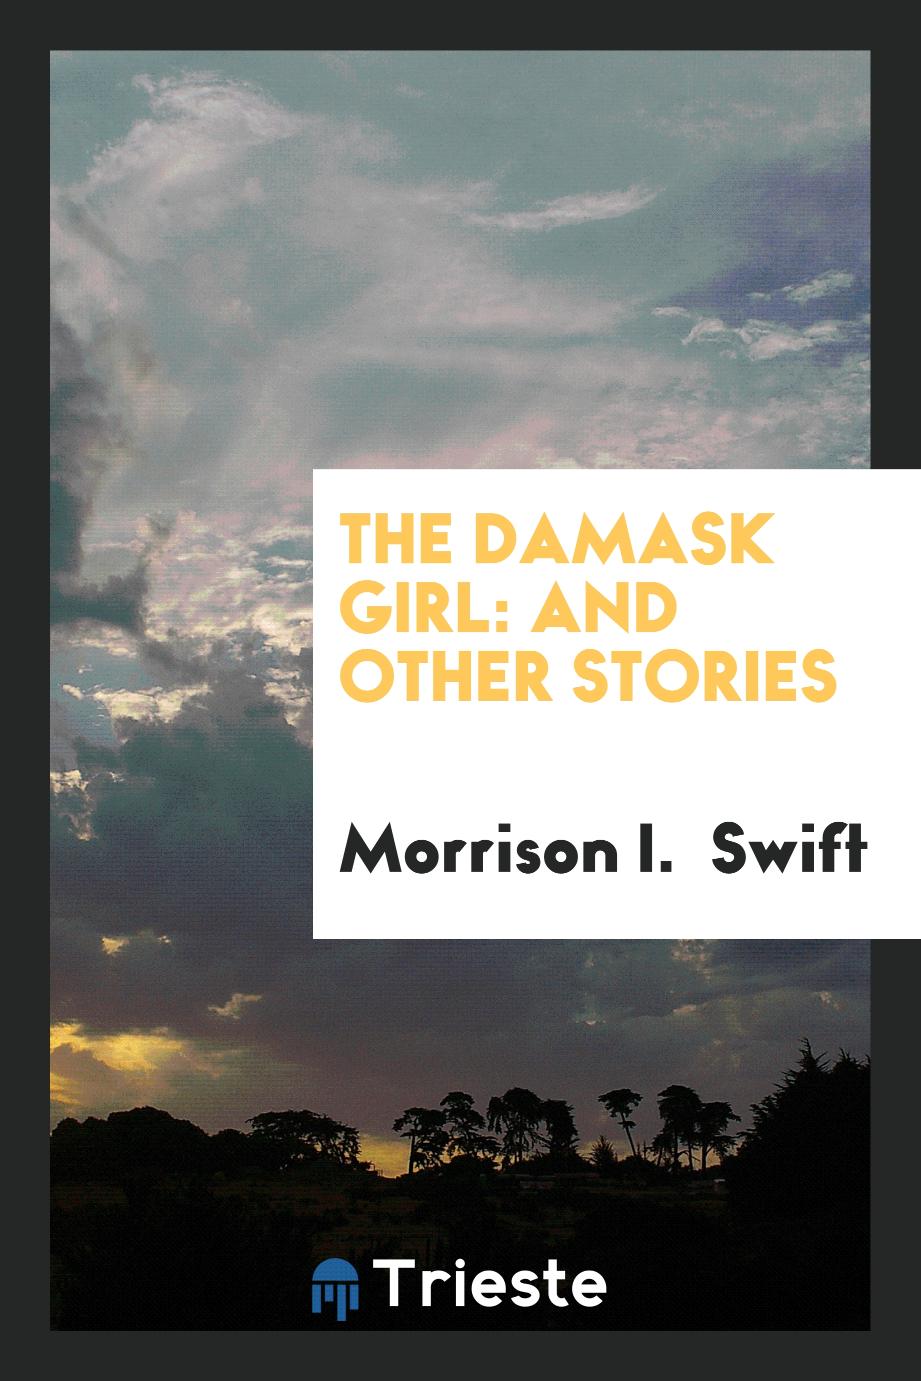 The Damask Girl: And Other Stories